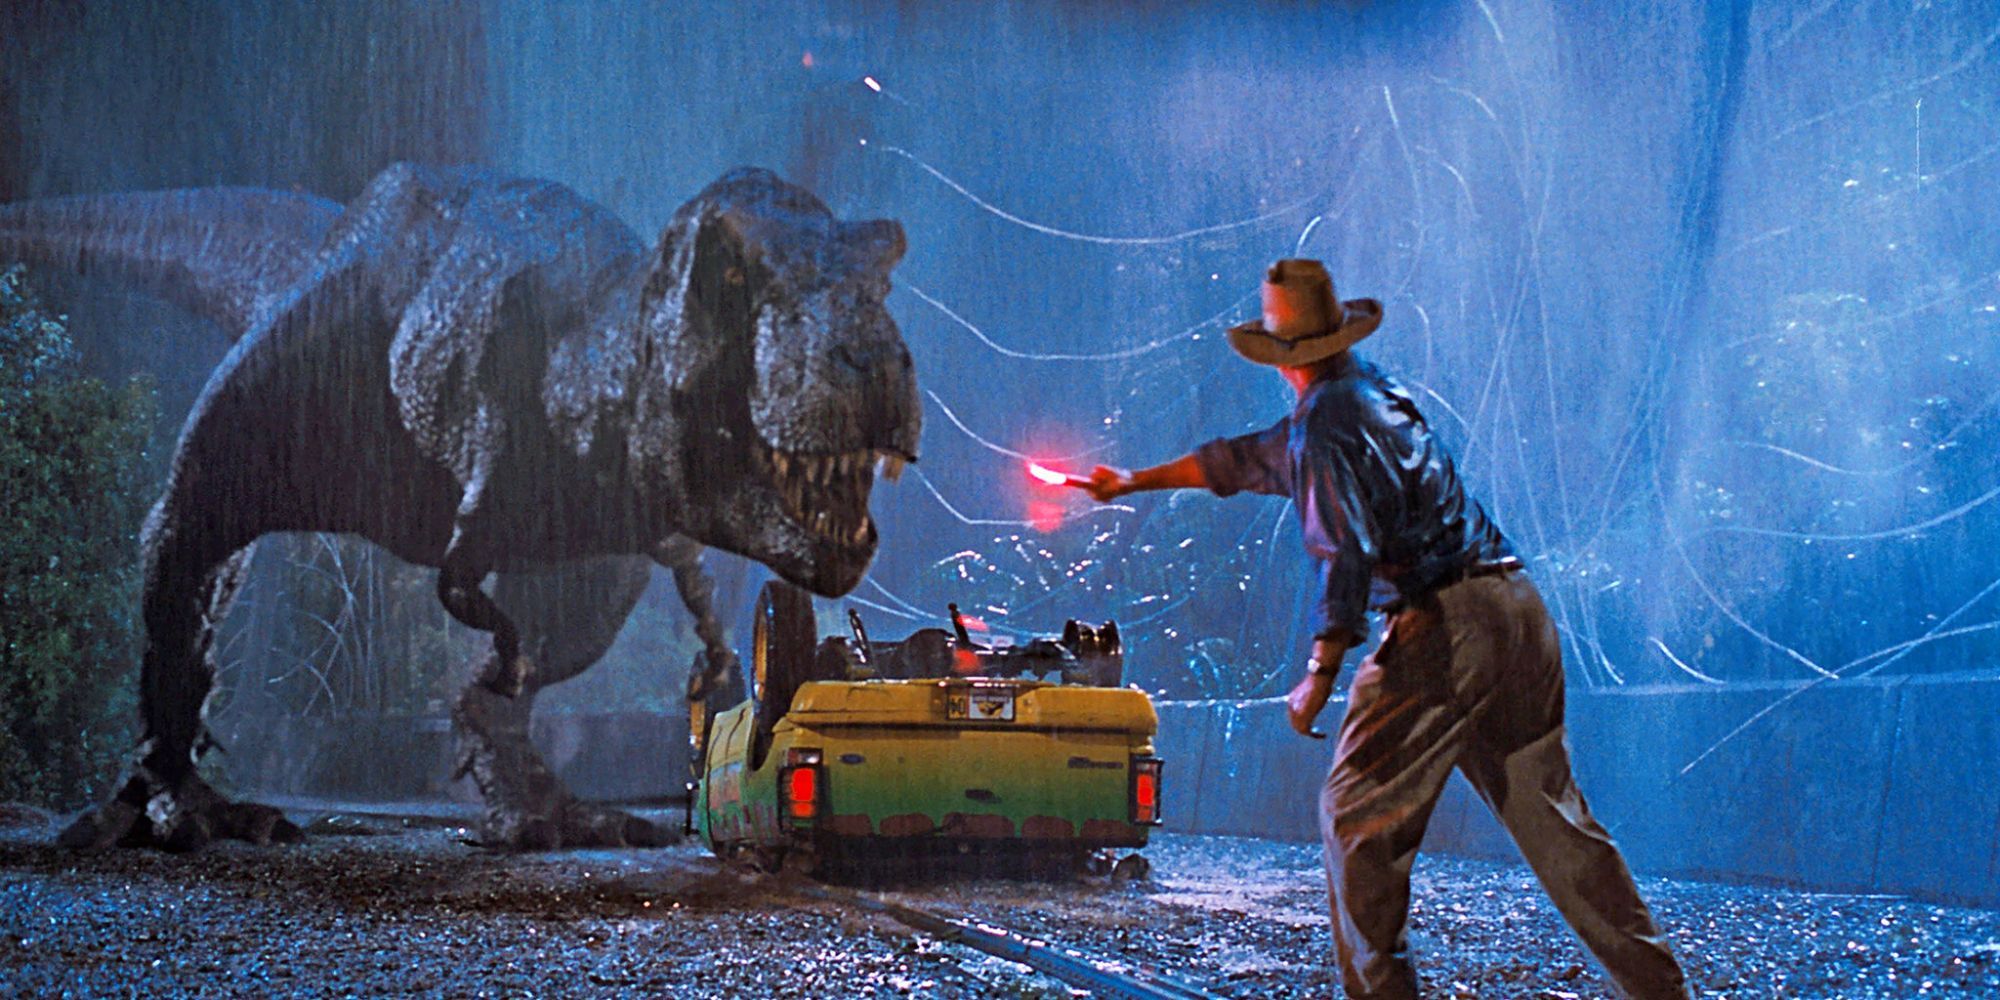 Alan Grant has distracted the T-Rex.